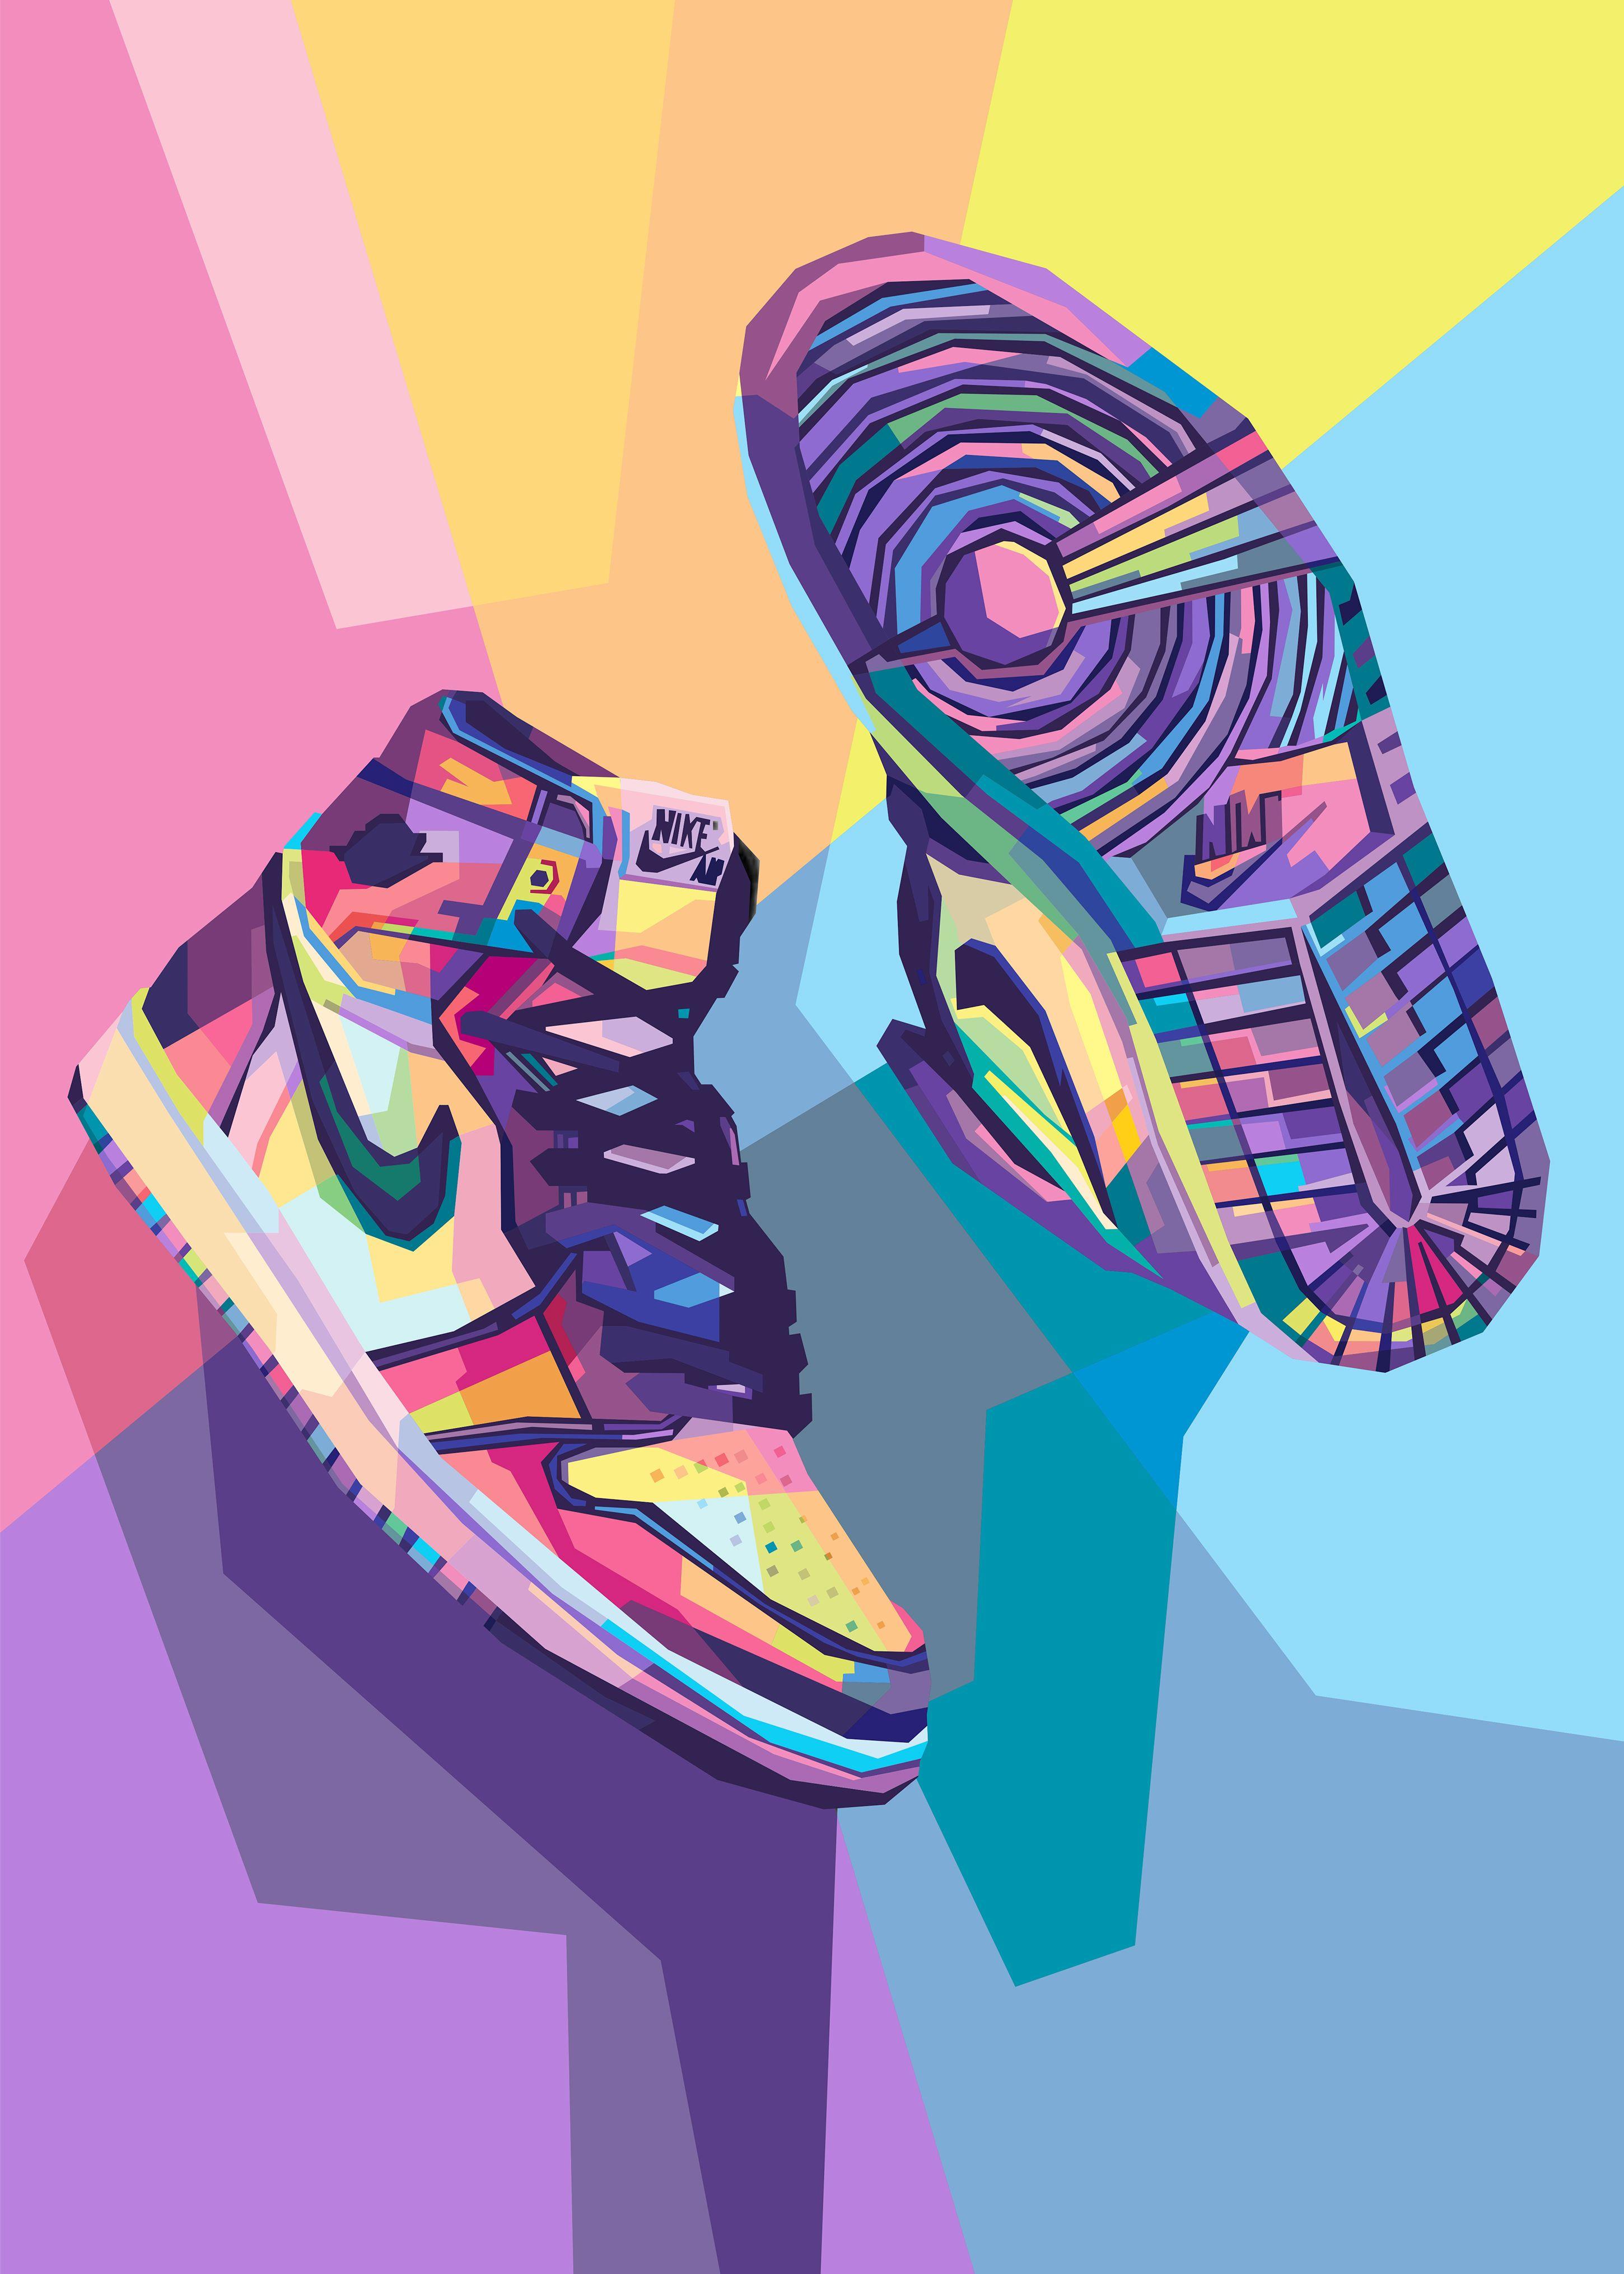 Pin by Lucile on W A L L P A P E R S  Sneakers wallpaper Cool nike  wallpapers Shoes wallpaper